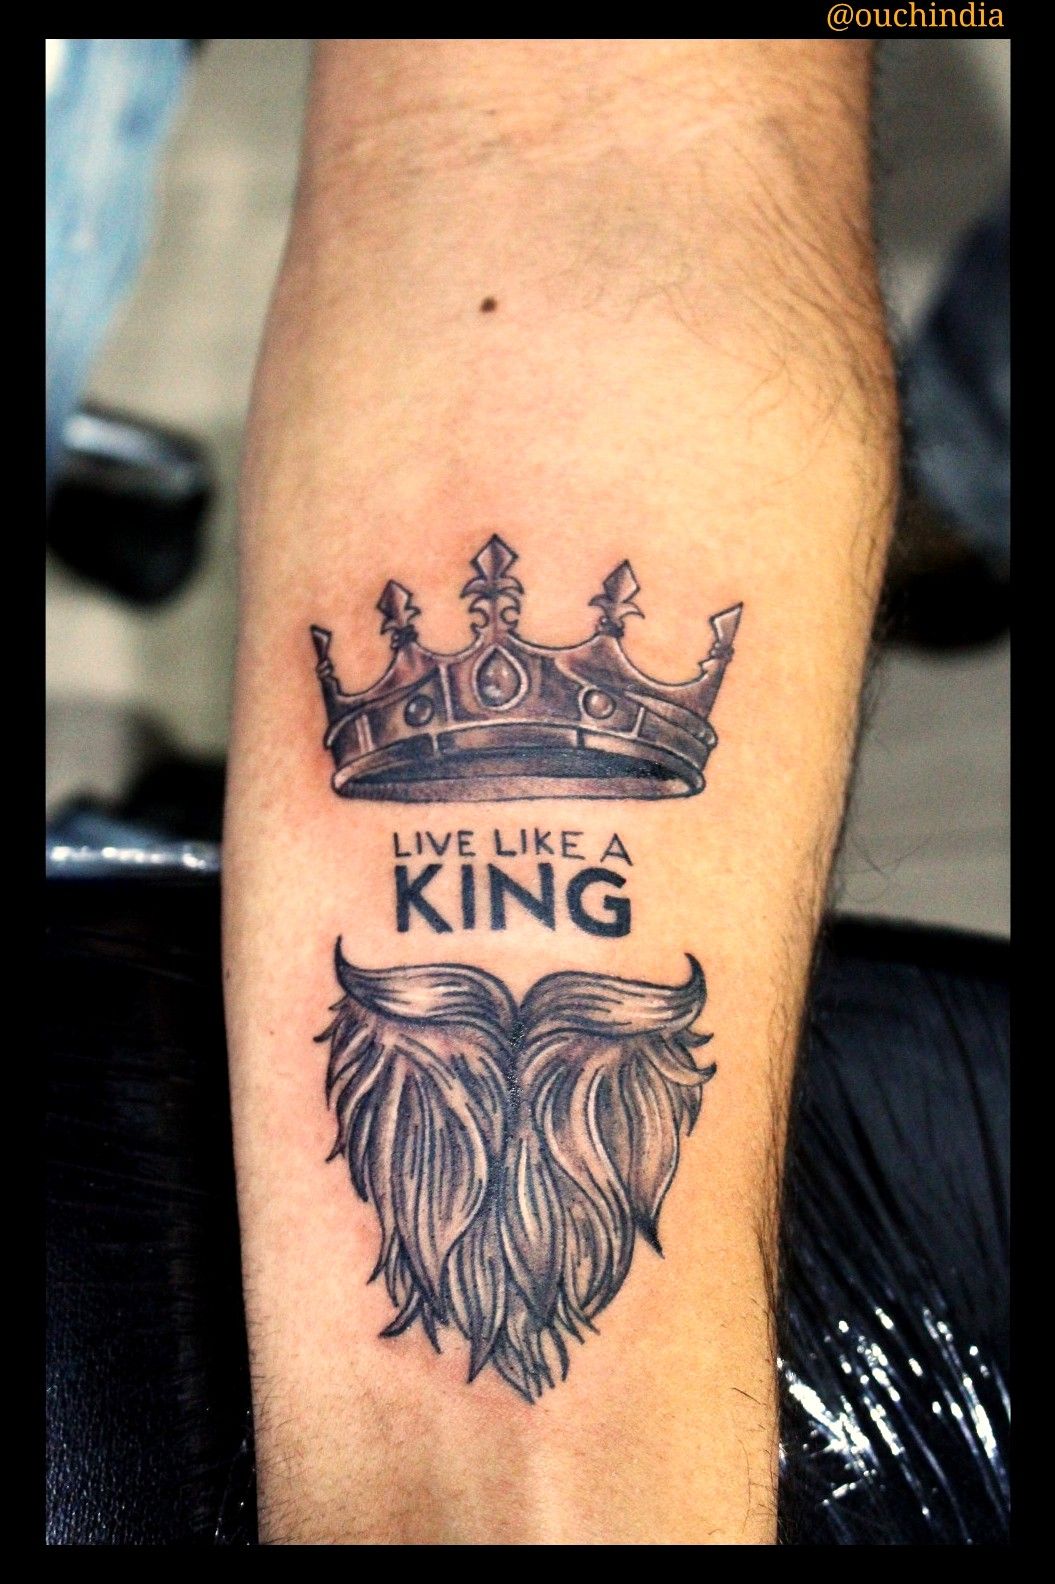 Tattoo uploaded by Shabbir • Live like a king tattoo at OUCH. For ...